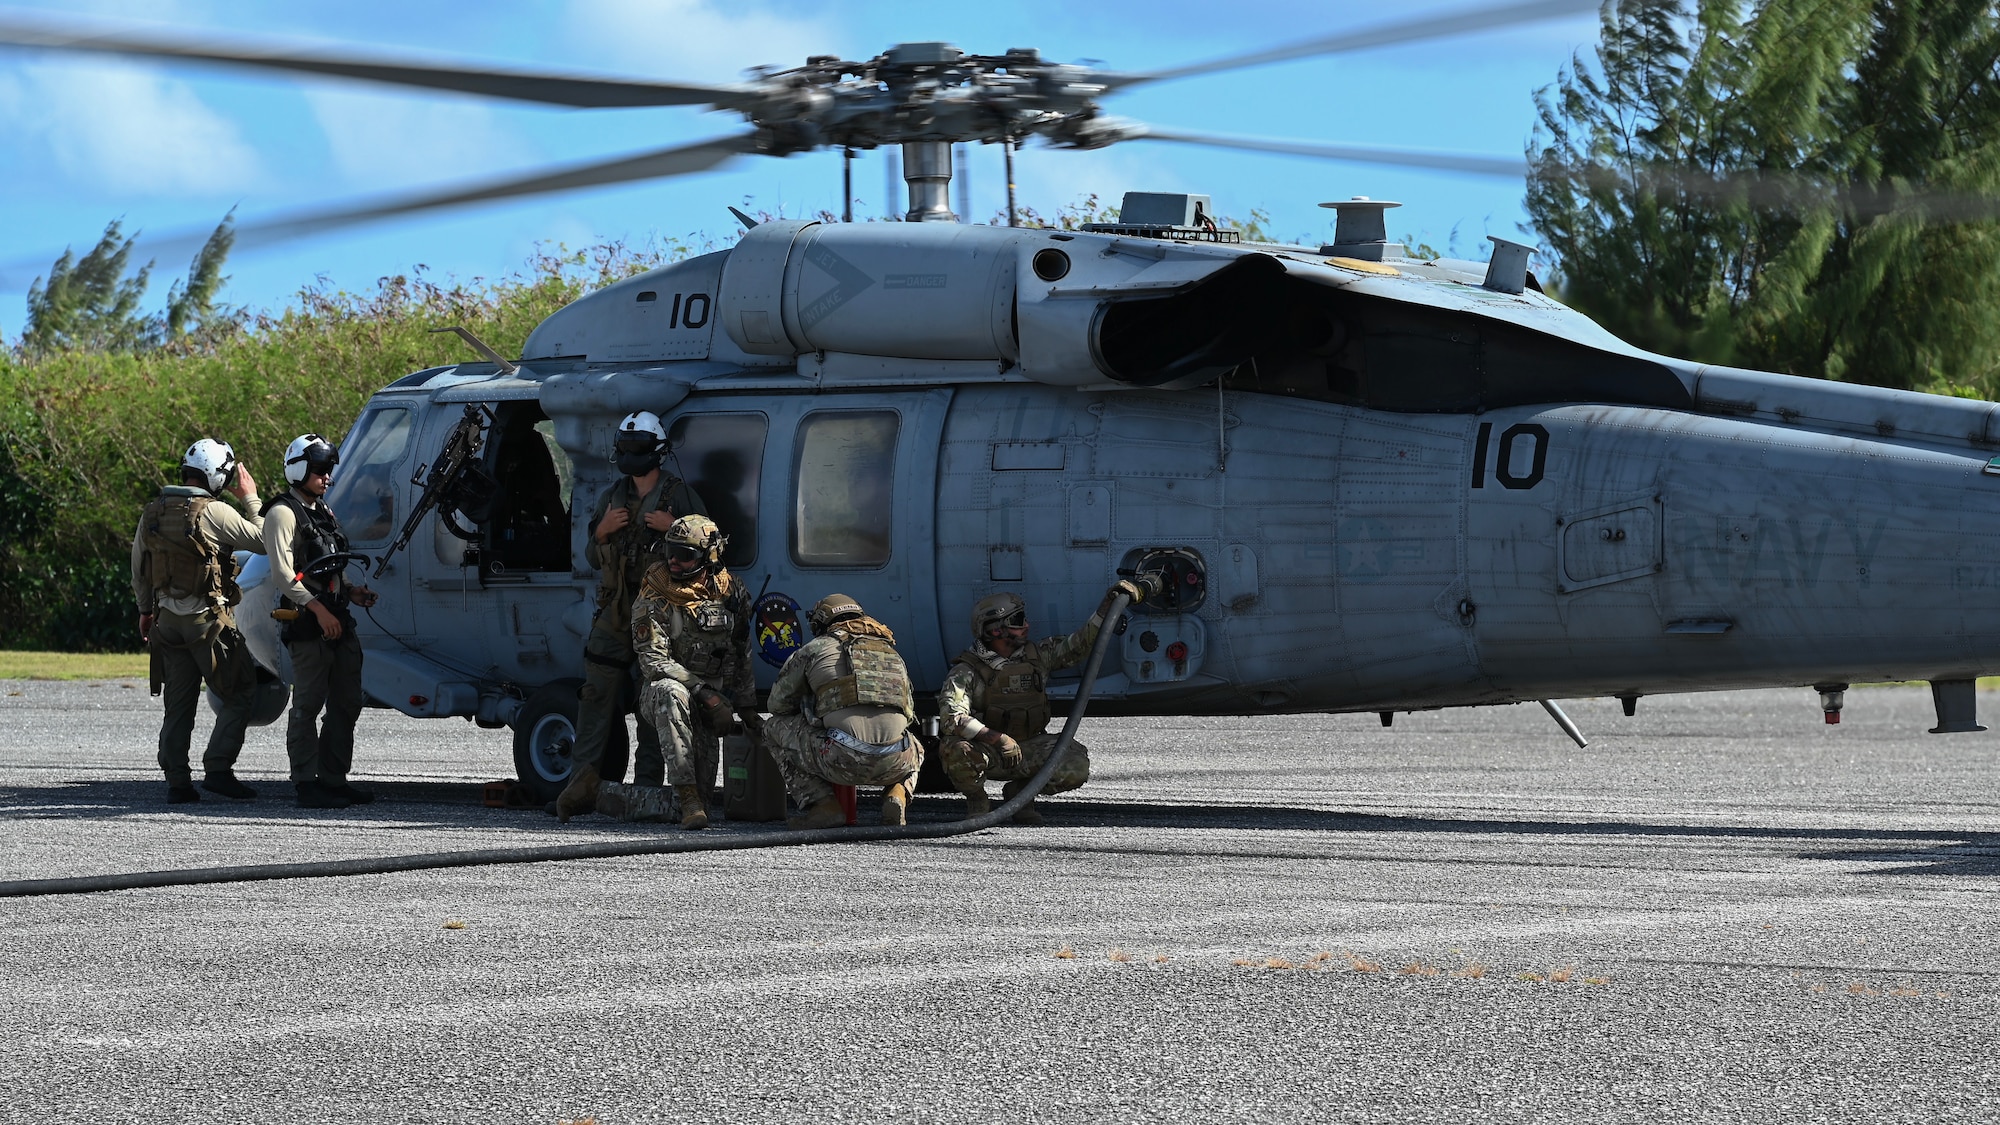 Three Airmen fuel a MH-60 helicopter while three Navy pilots wait for the process to finish.